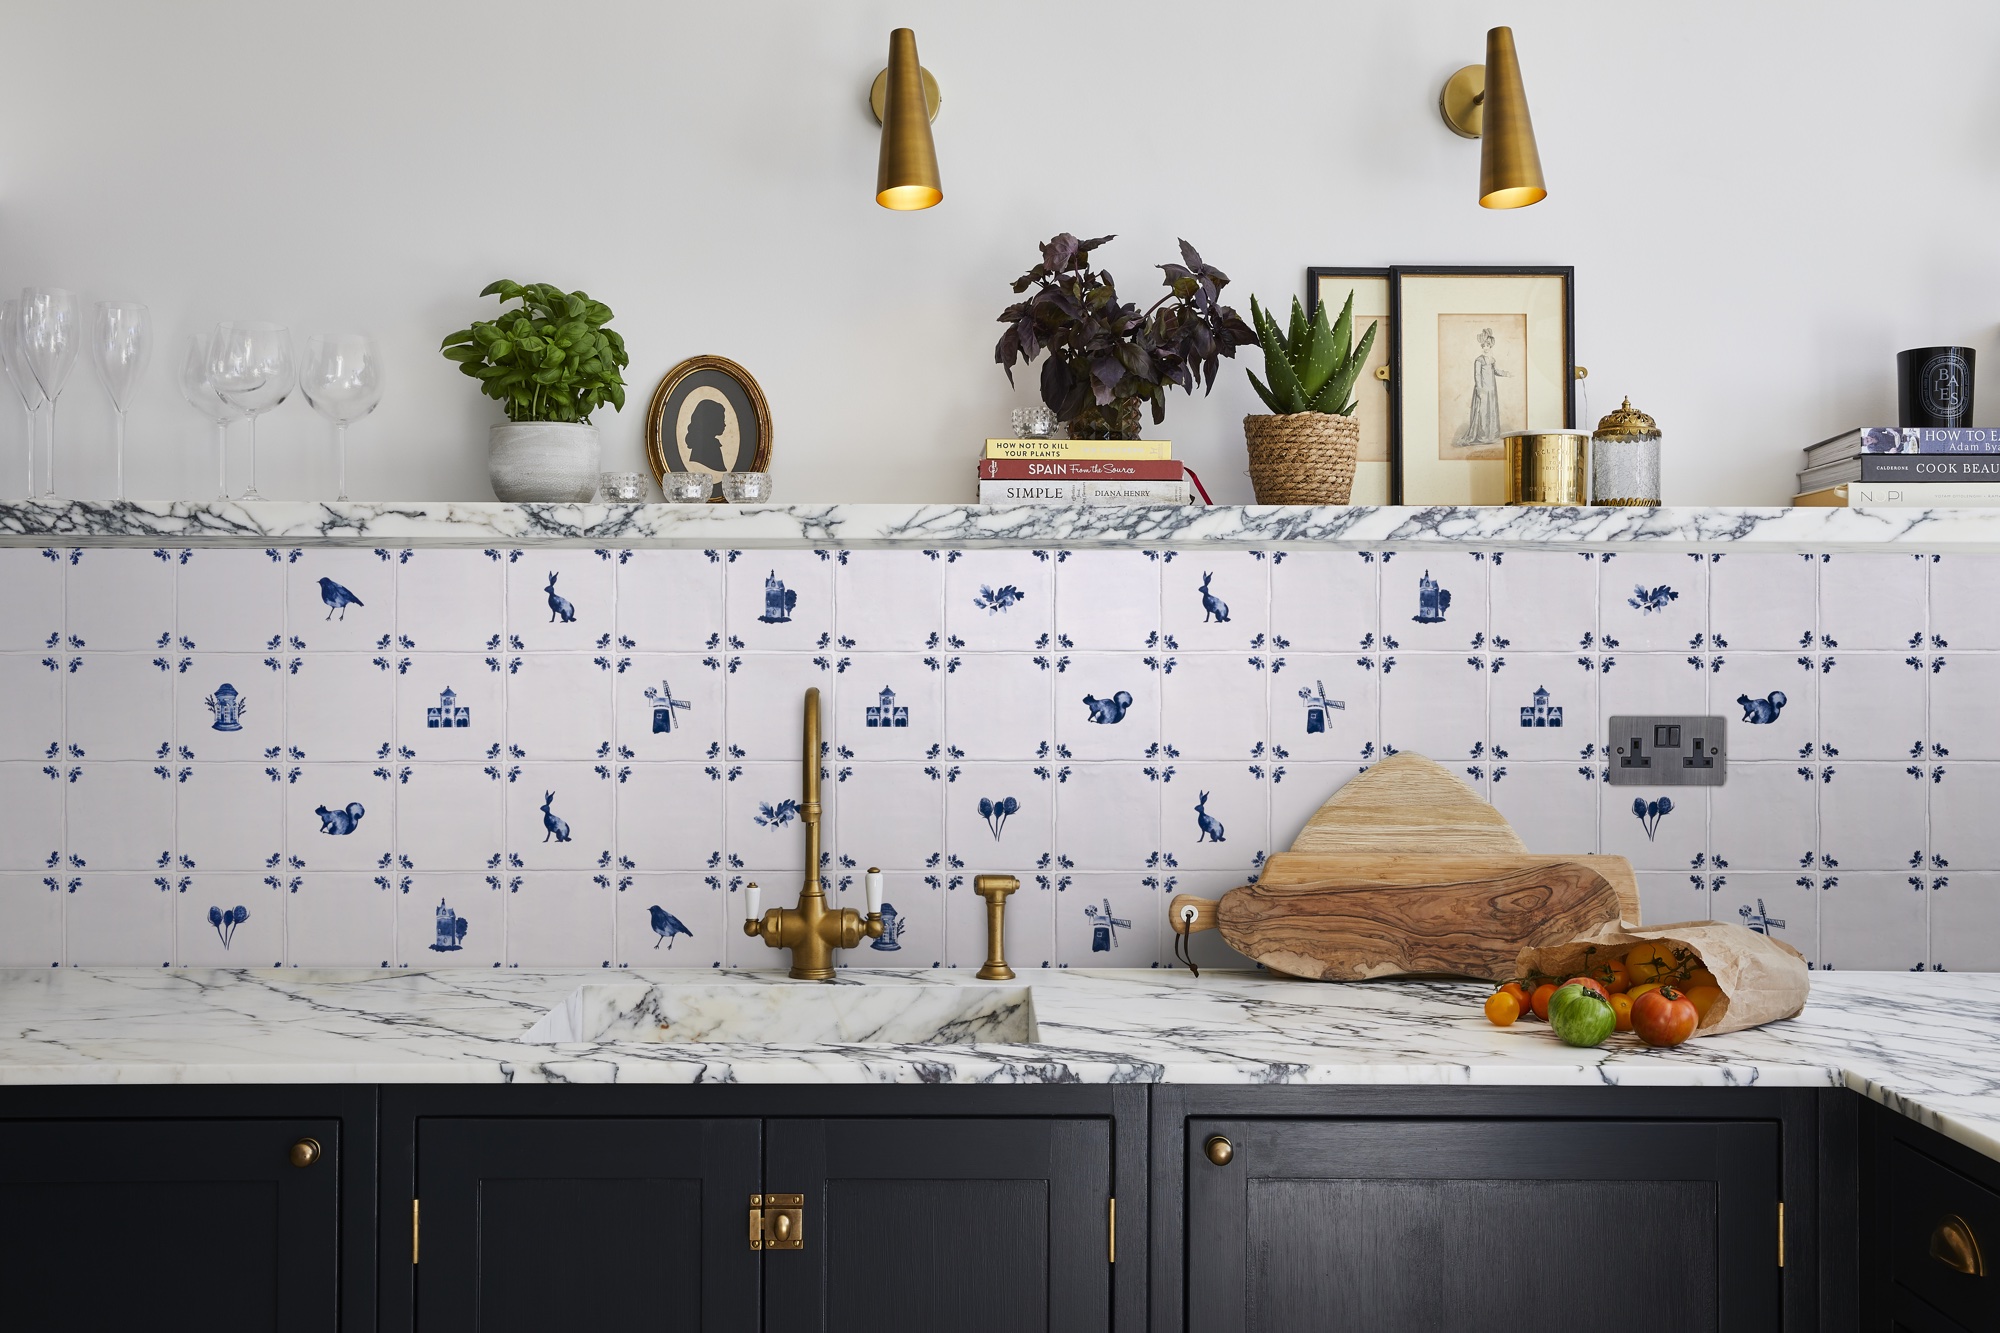 How to install a backsplash   Top tips from the experts   Homes ...